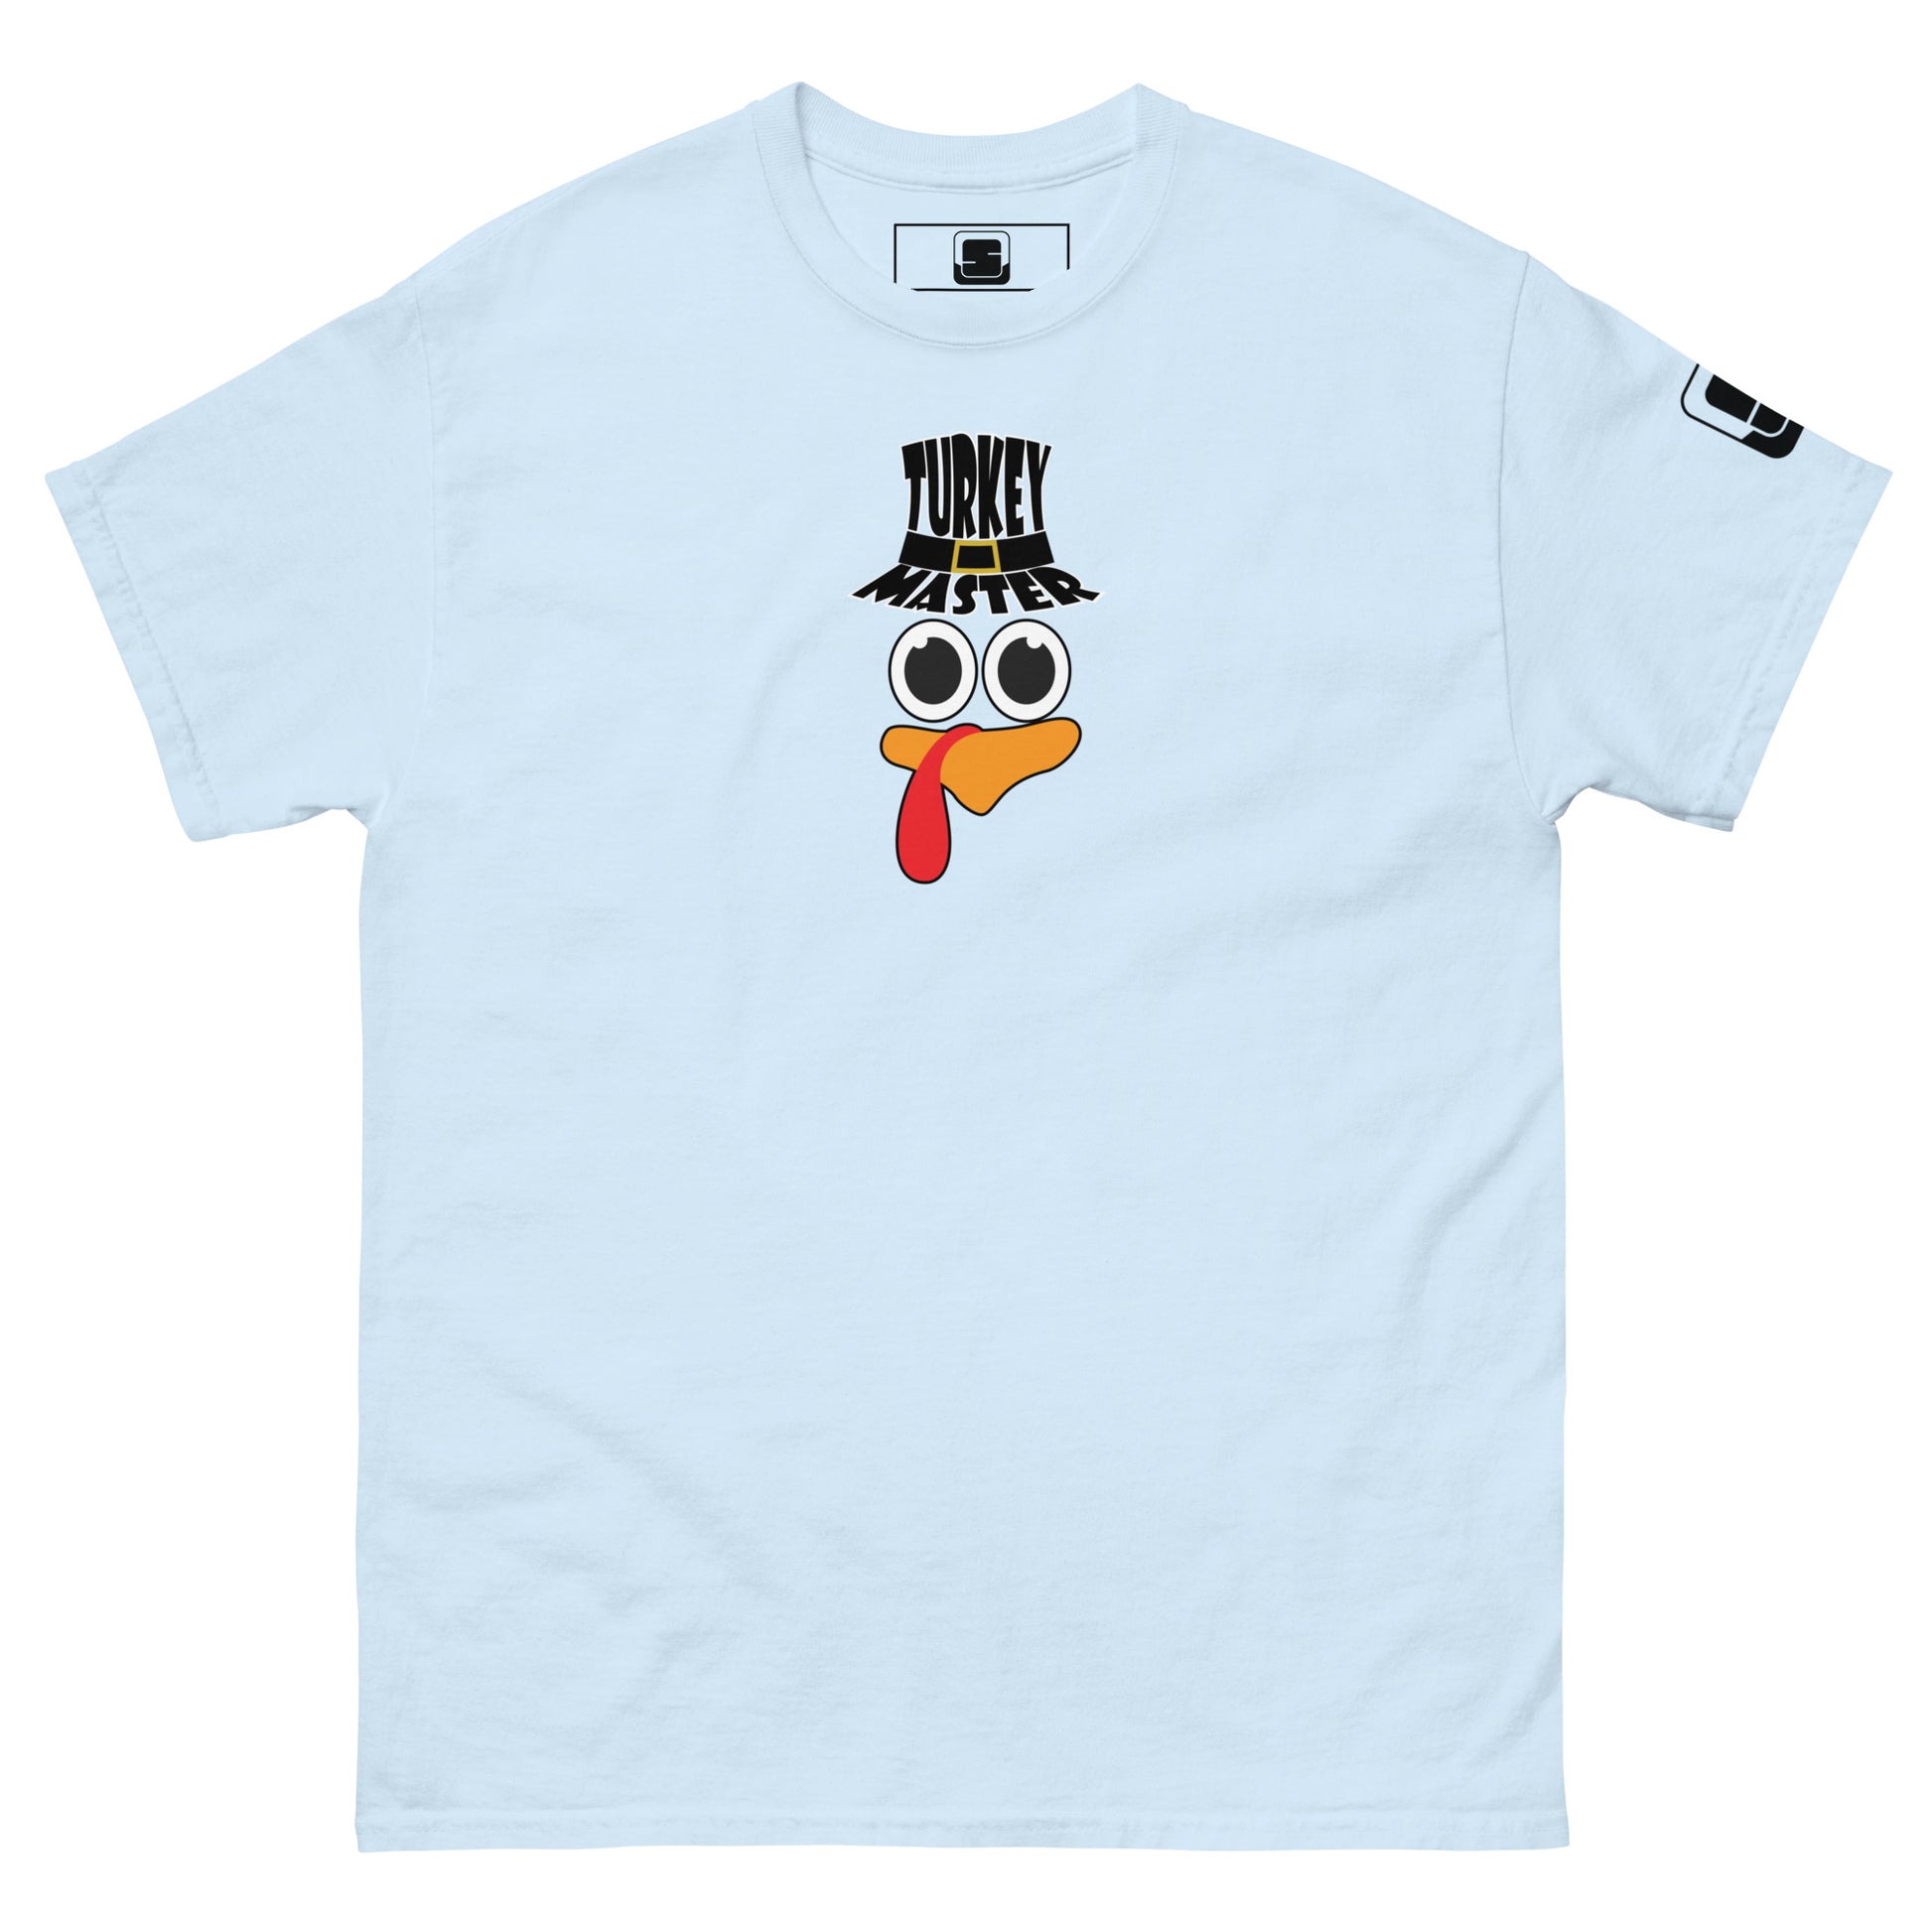 A light-blue t-shirt featuring a playful graphic design of a turkey face with eyes, an orange beak, and a red snood. Above the face, the text reads "TURKEY MASTER" in bold, stylized letters. The text is in the shape of a pilgrims hat. On the left sleeve, there's a rectangular logo patch, adding a unique touch. The shirt is laid out flat, showcasing the entire design clearly.